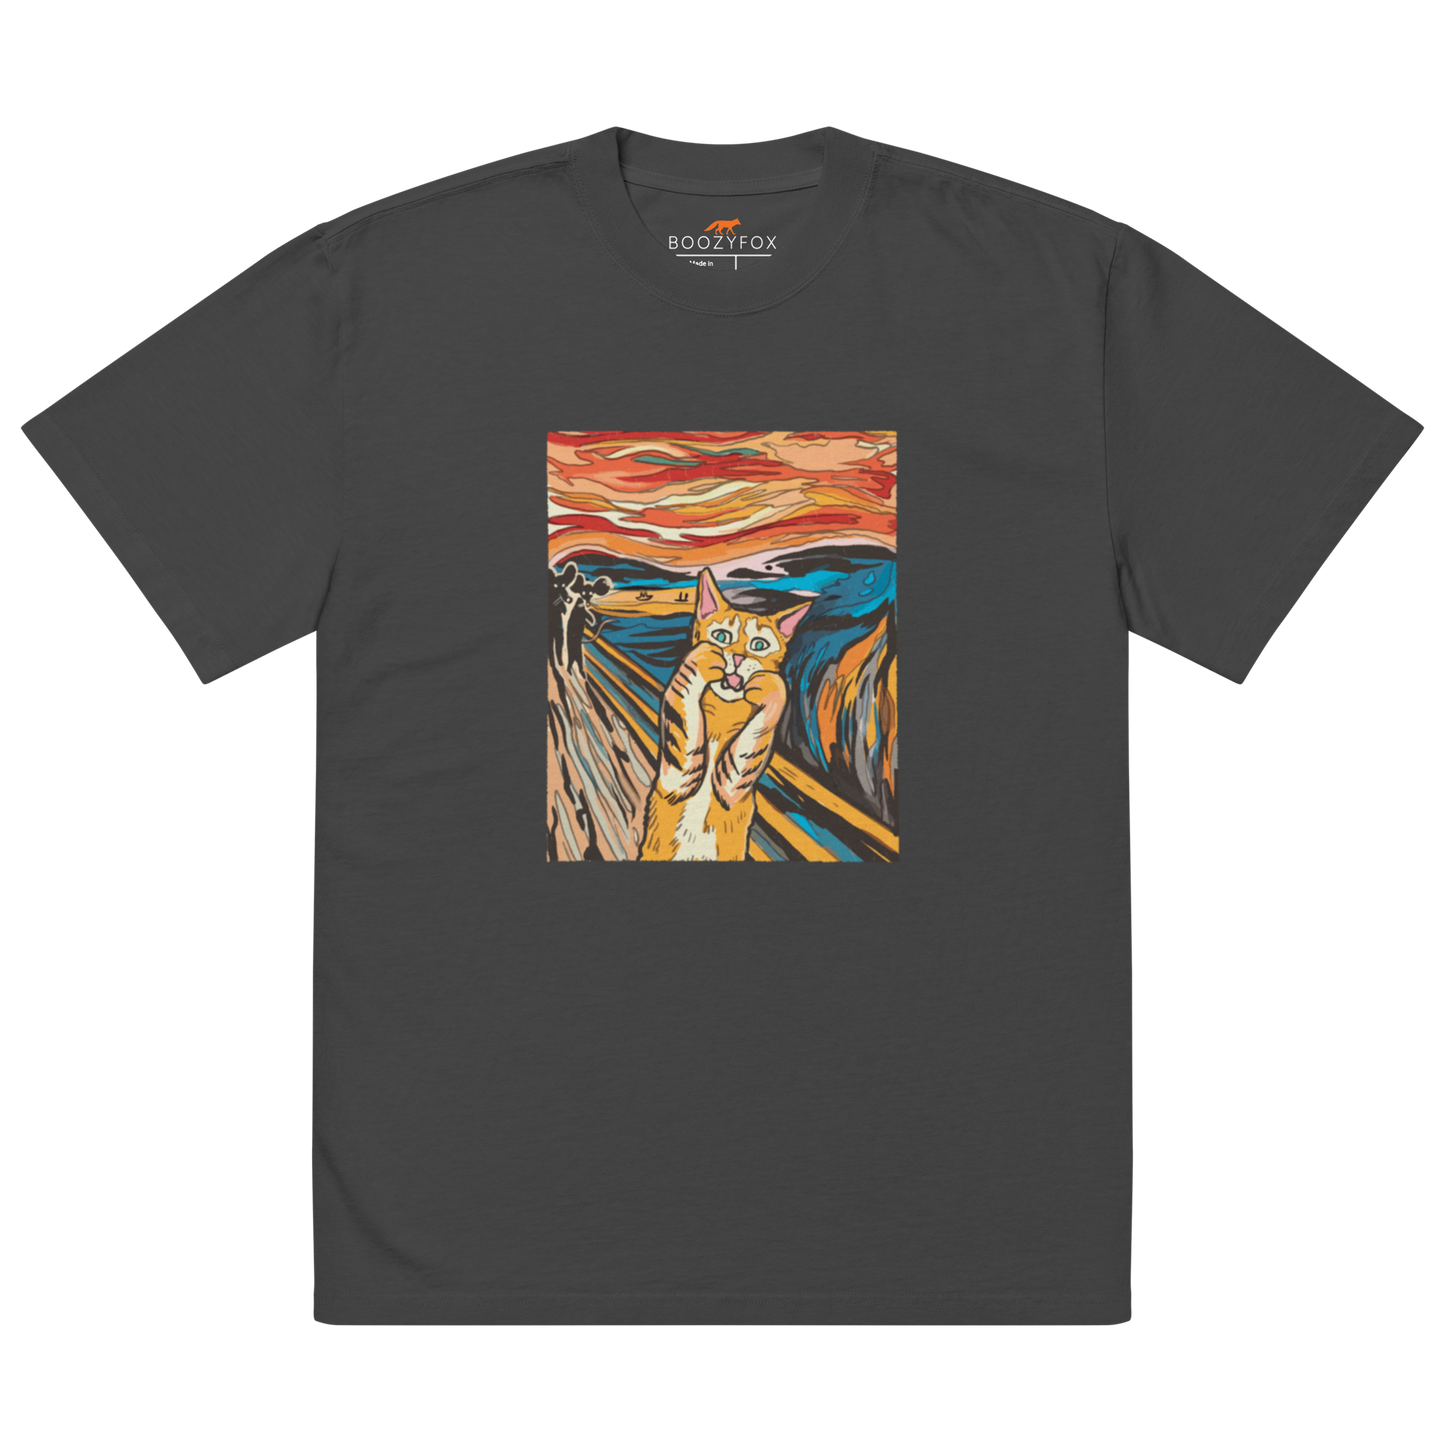 Faded Black Screaming Cat Oversized T-Shirt showcasing the iconic 'The Scream' graphic on the chest - Funny Graphic Cat Oversized Tees - Boozy Fox